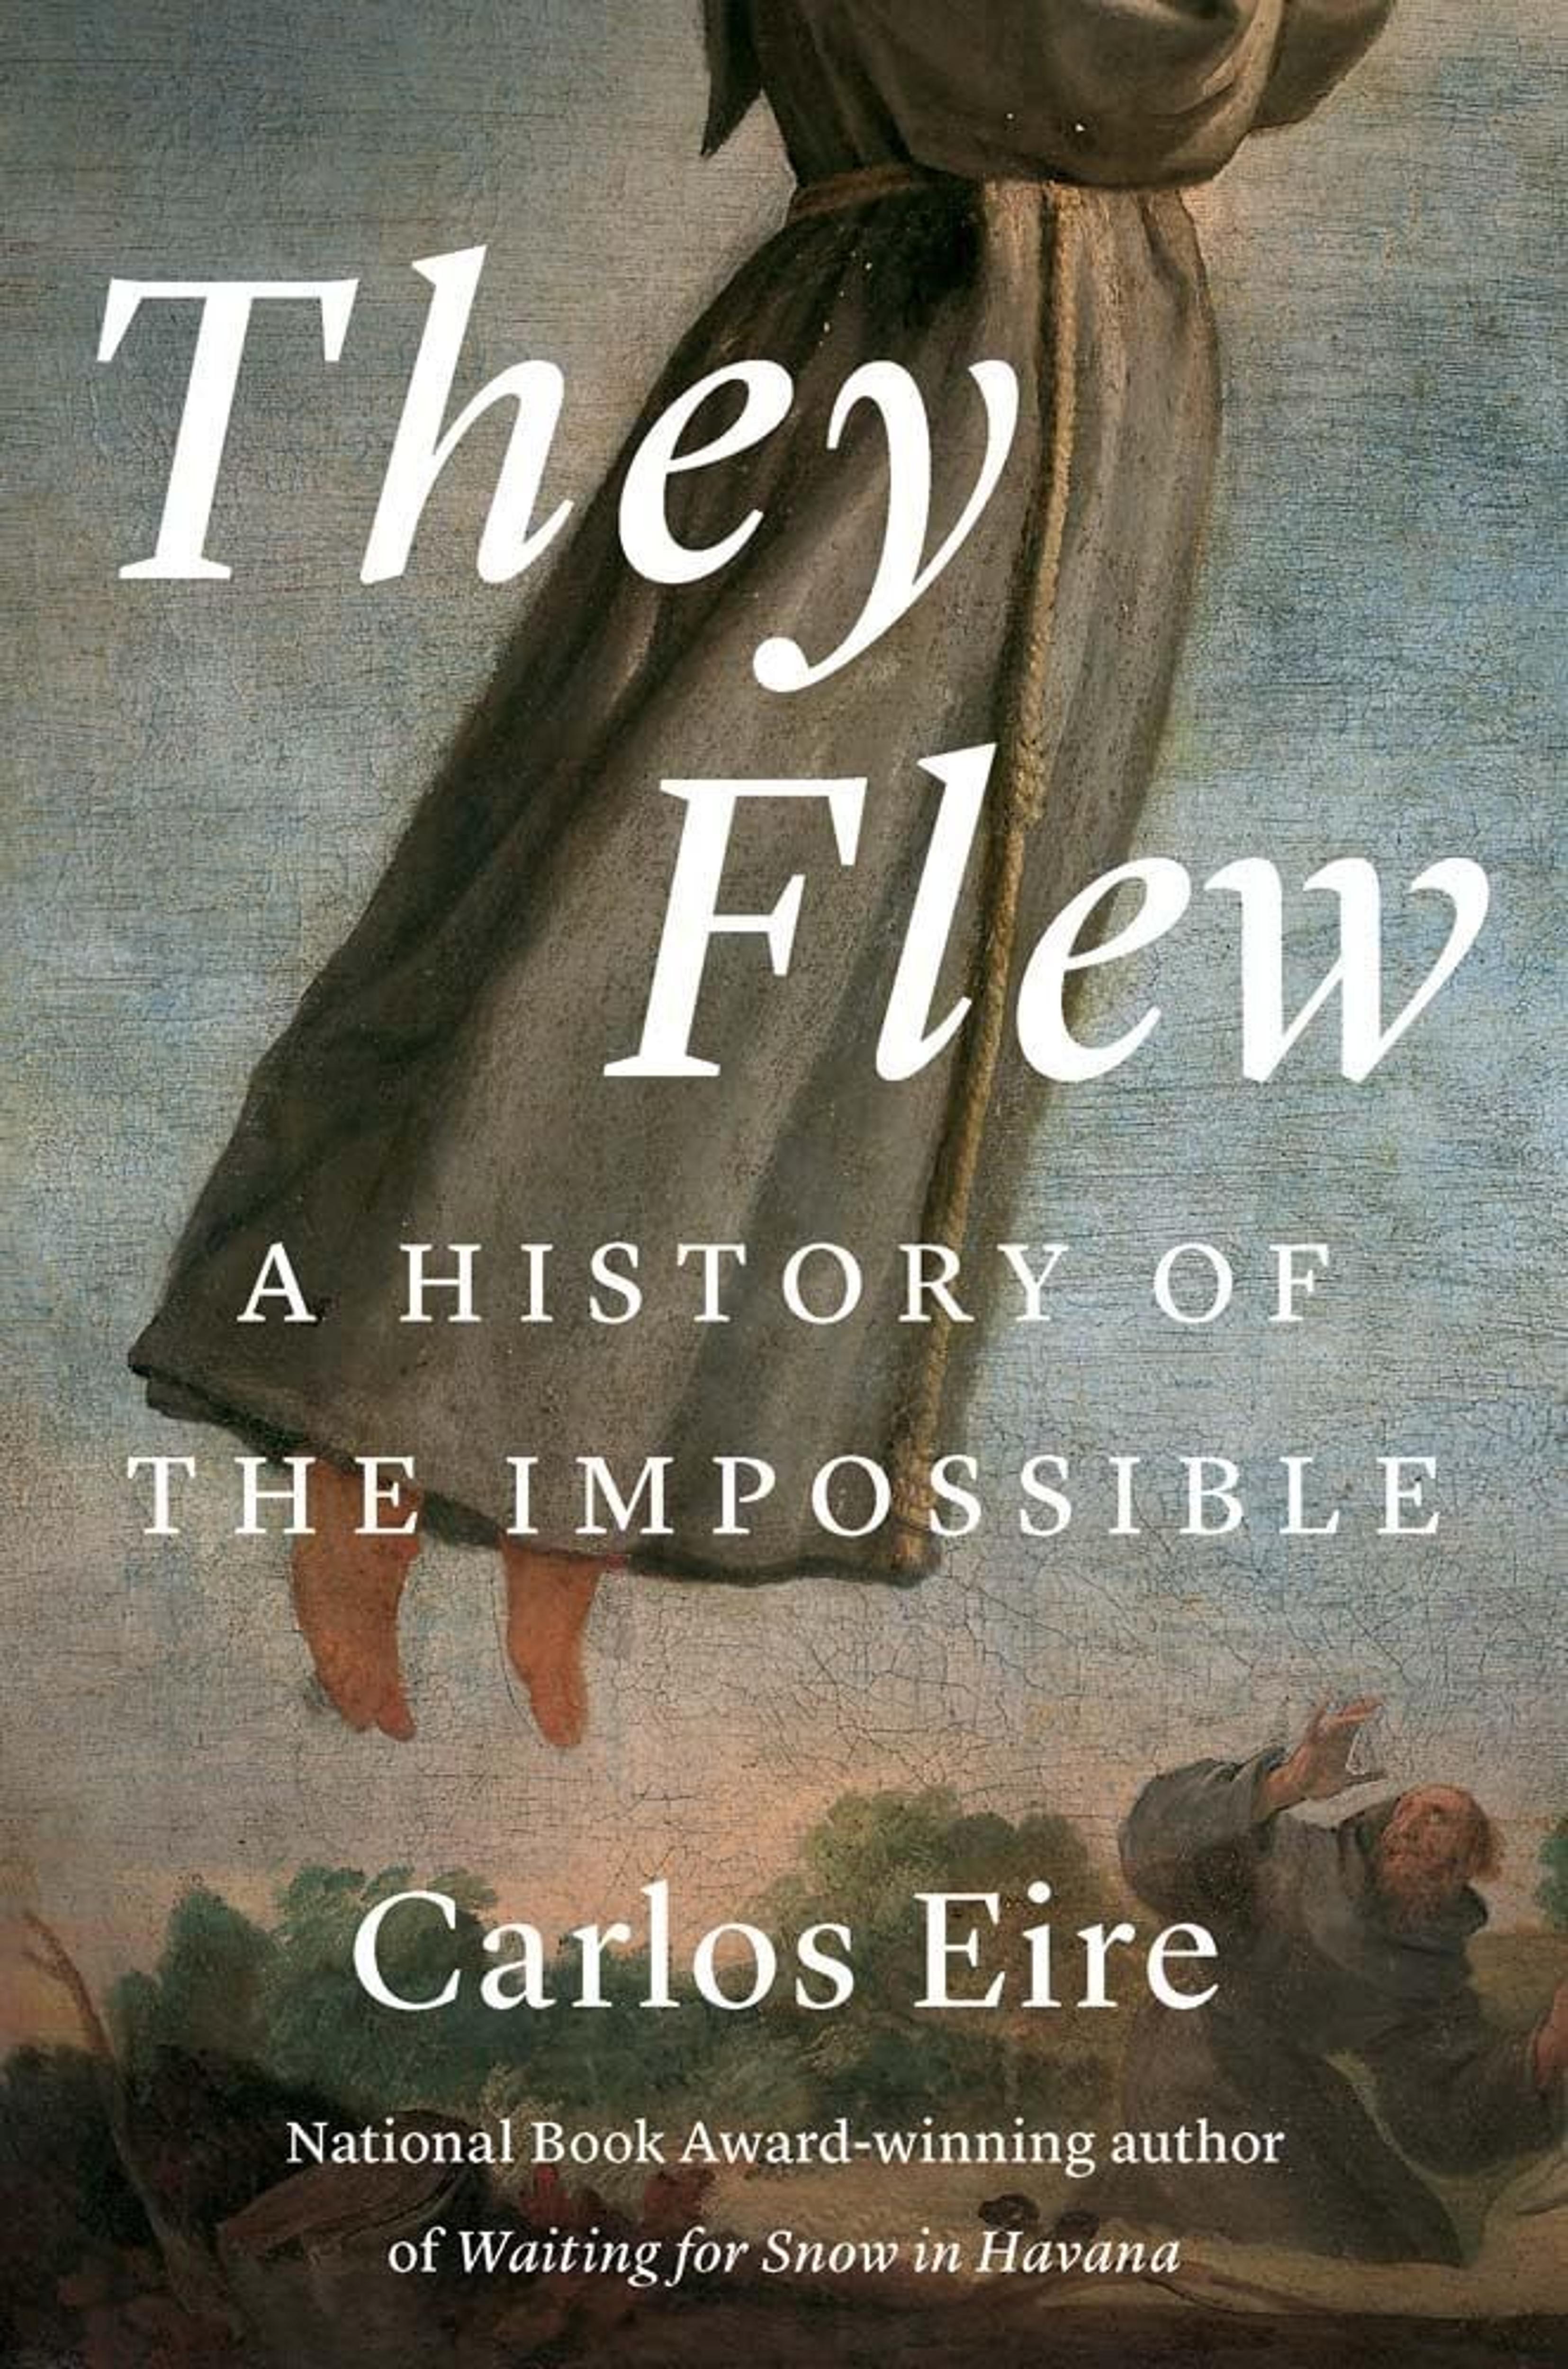 Trances, Ecstasies, Raptures, and Levitations: On Carlos Eire’s “They Flew”